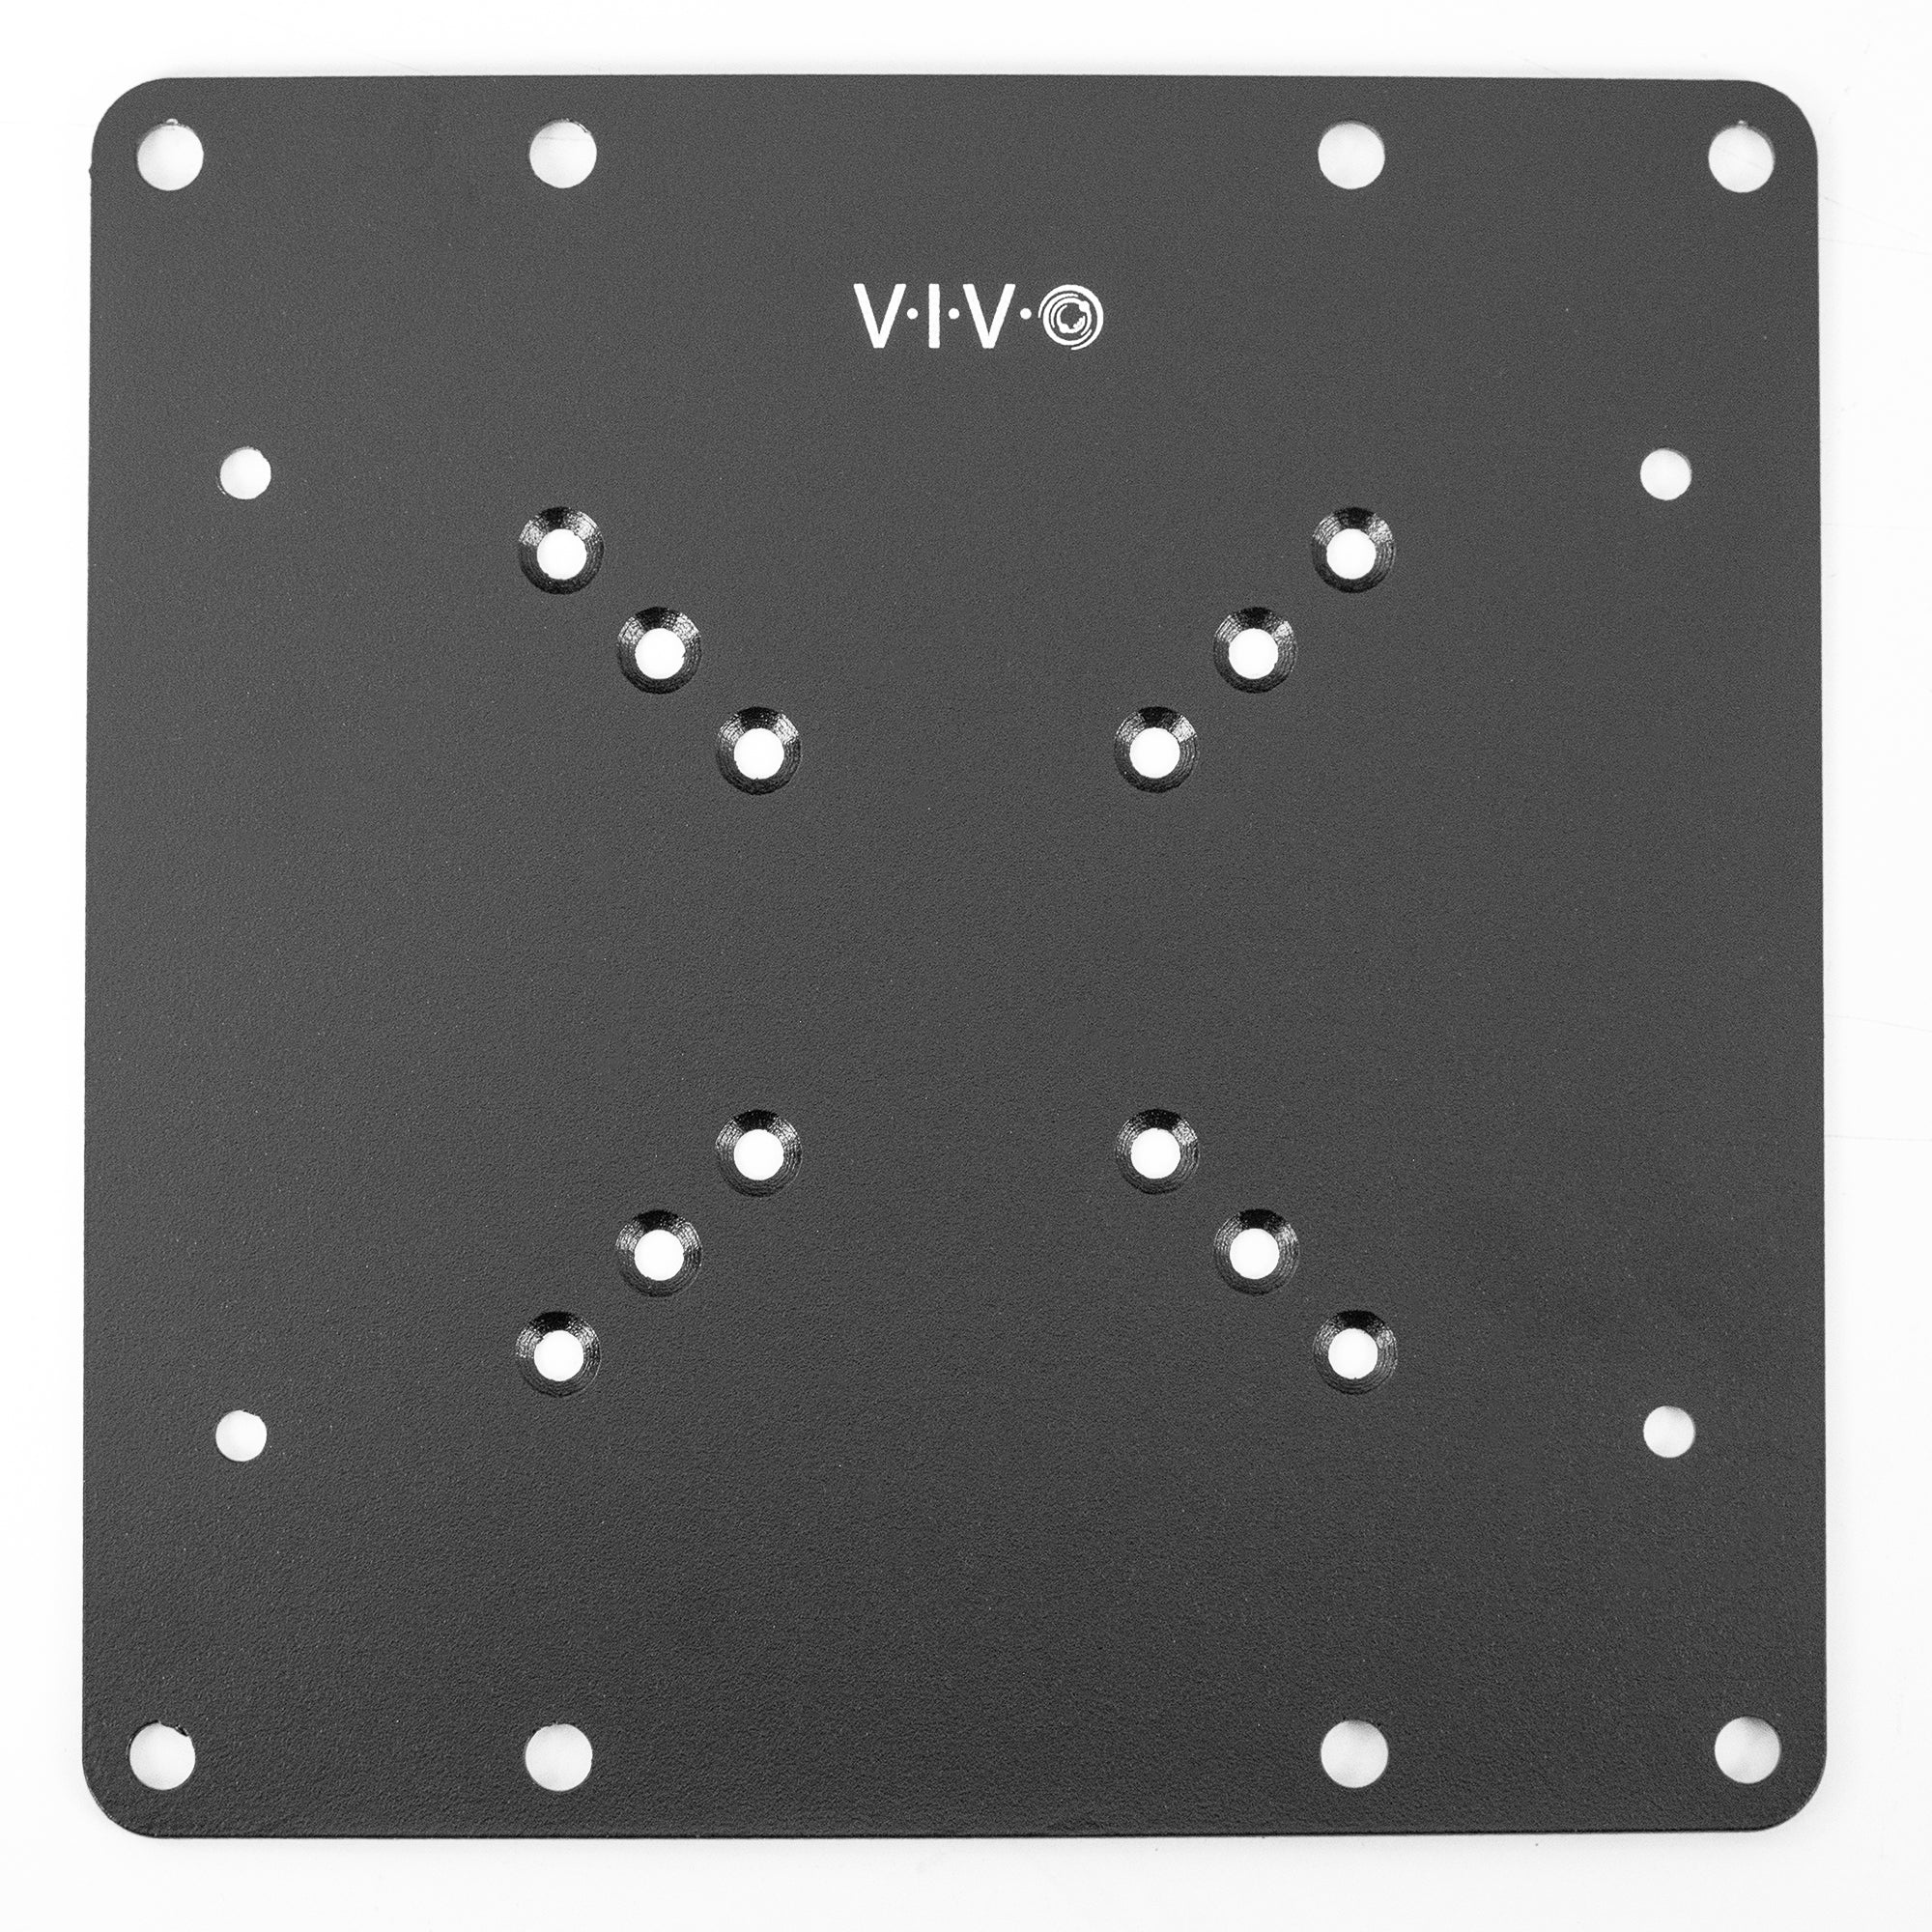 VESA Adapter plate for flat screens which have holes in 200 x